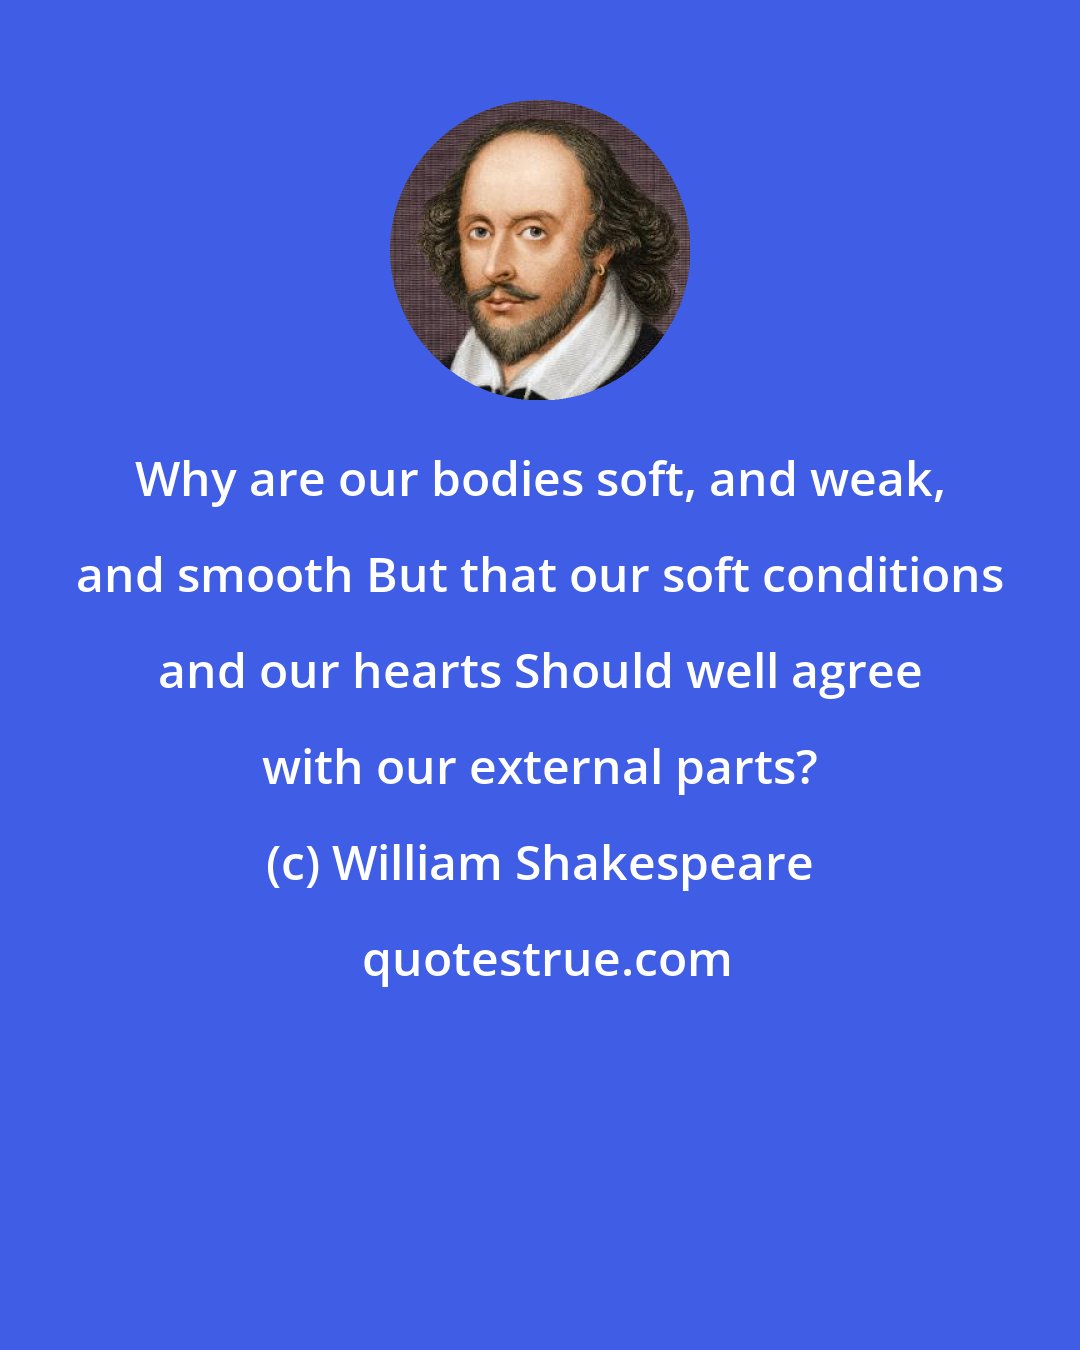 William Shakespeare: Why are our bodies soft, and weak, and smooth But that our soft conditions and our hearts Should well agree with our external parts?